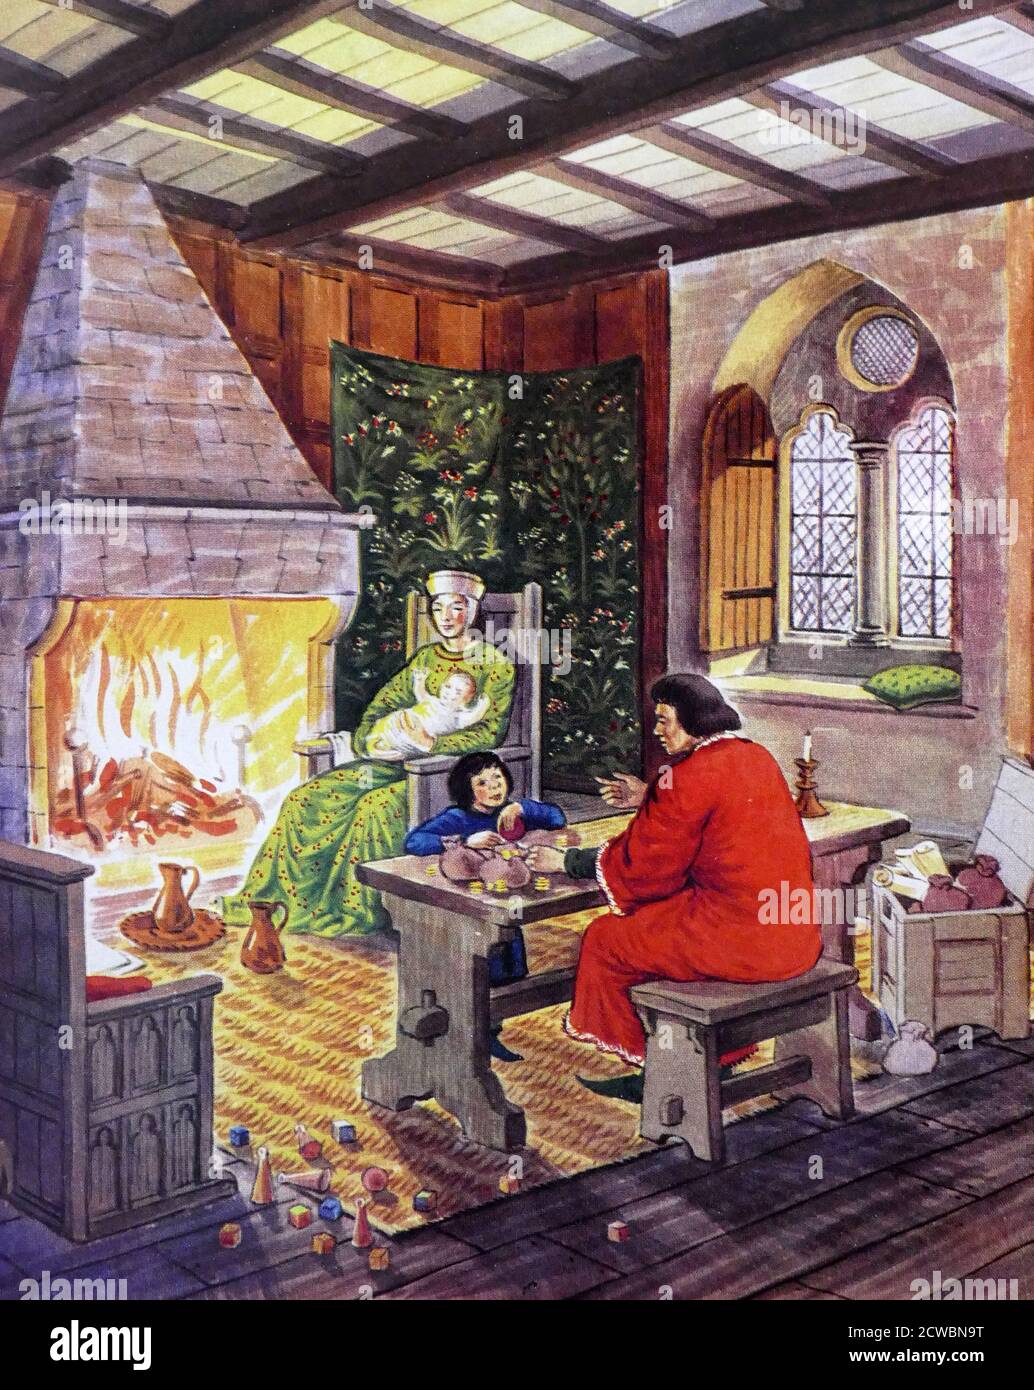 Illustration depicting the interior of a rich merchant's home, in England in the Middle Ages Stock Photo